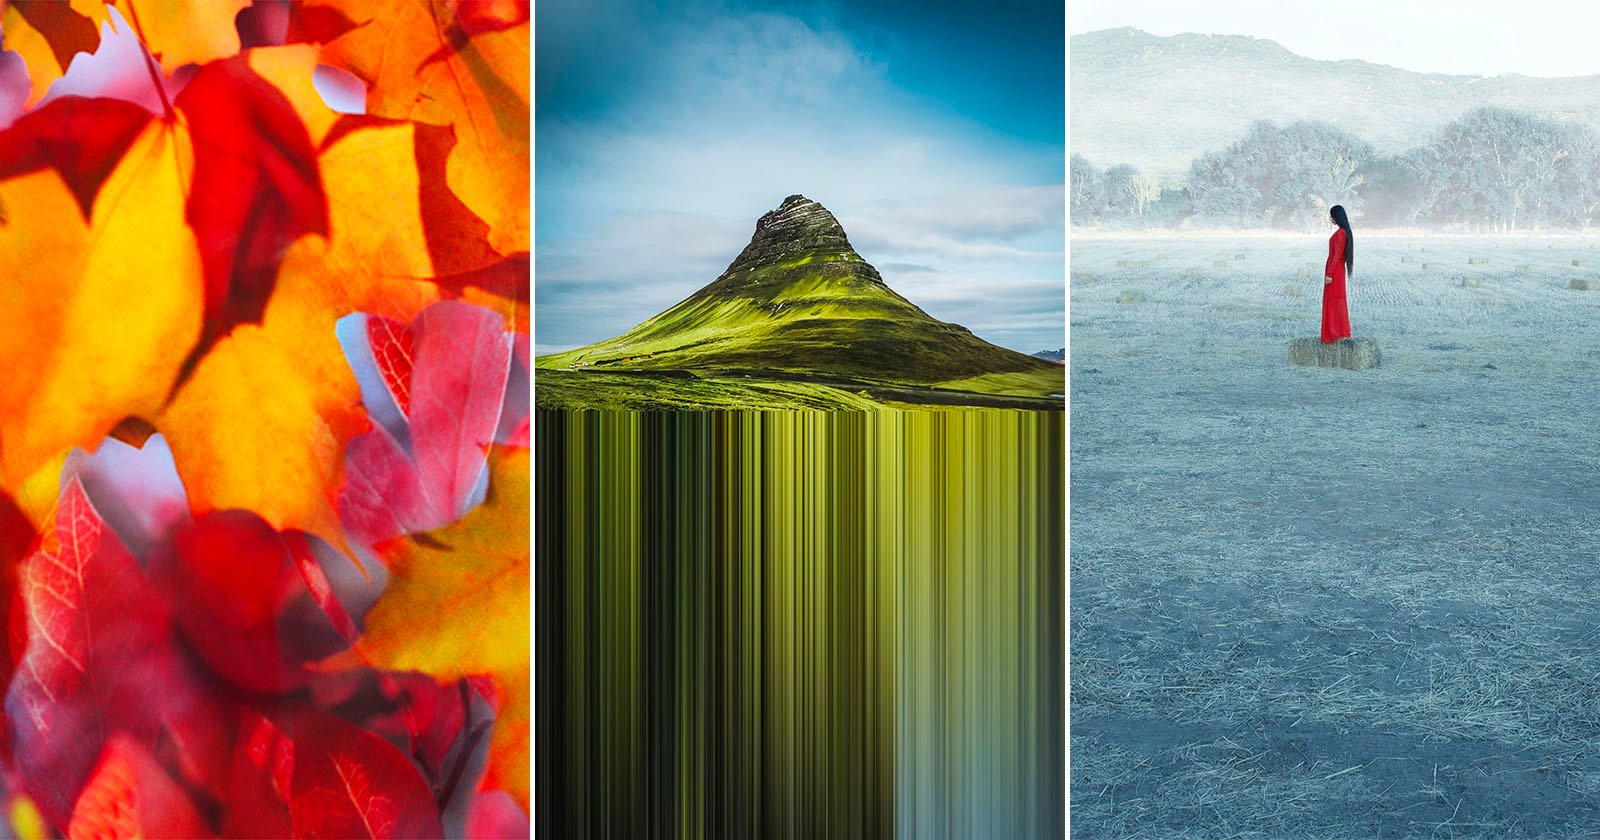 Singulart is an Online Art Gallery that Empowers Photographers